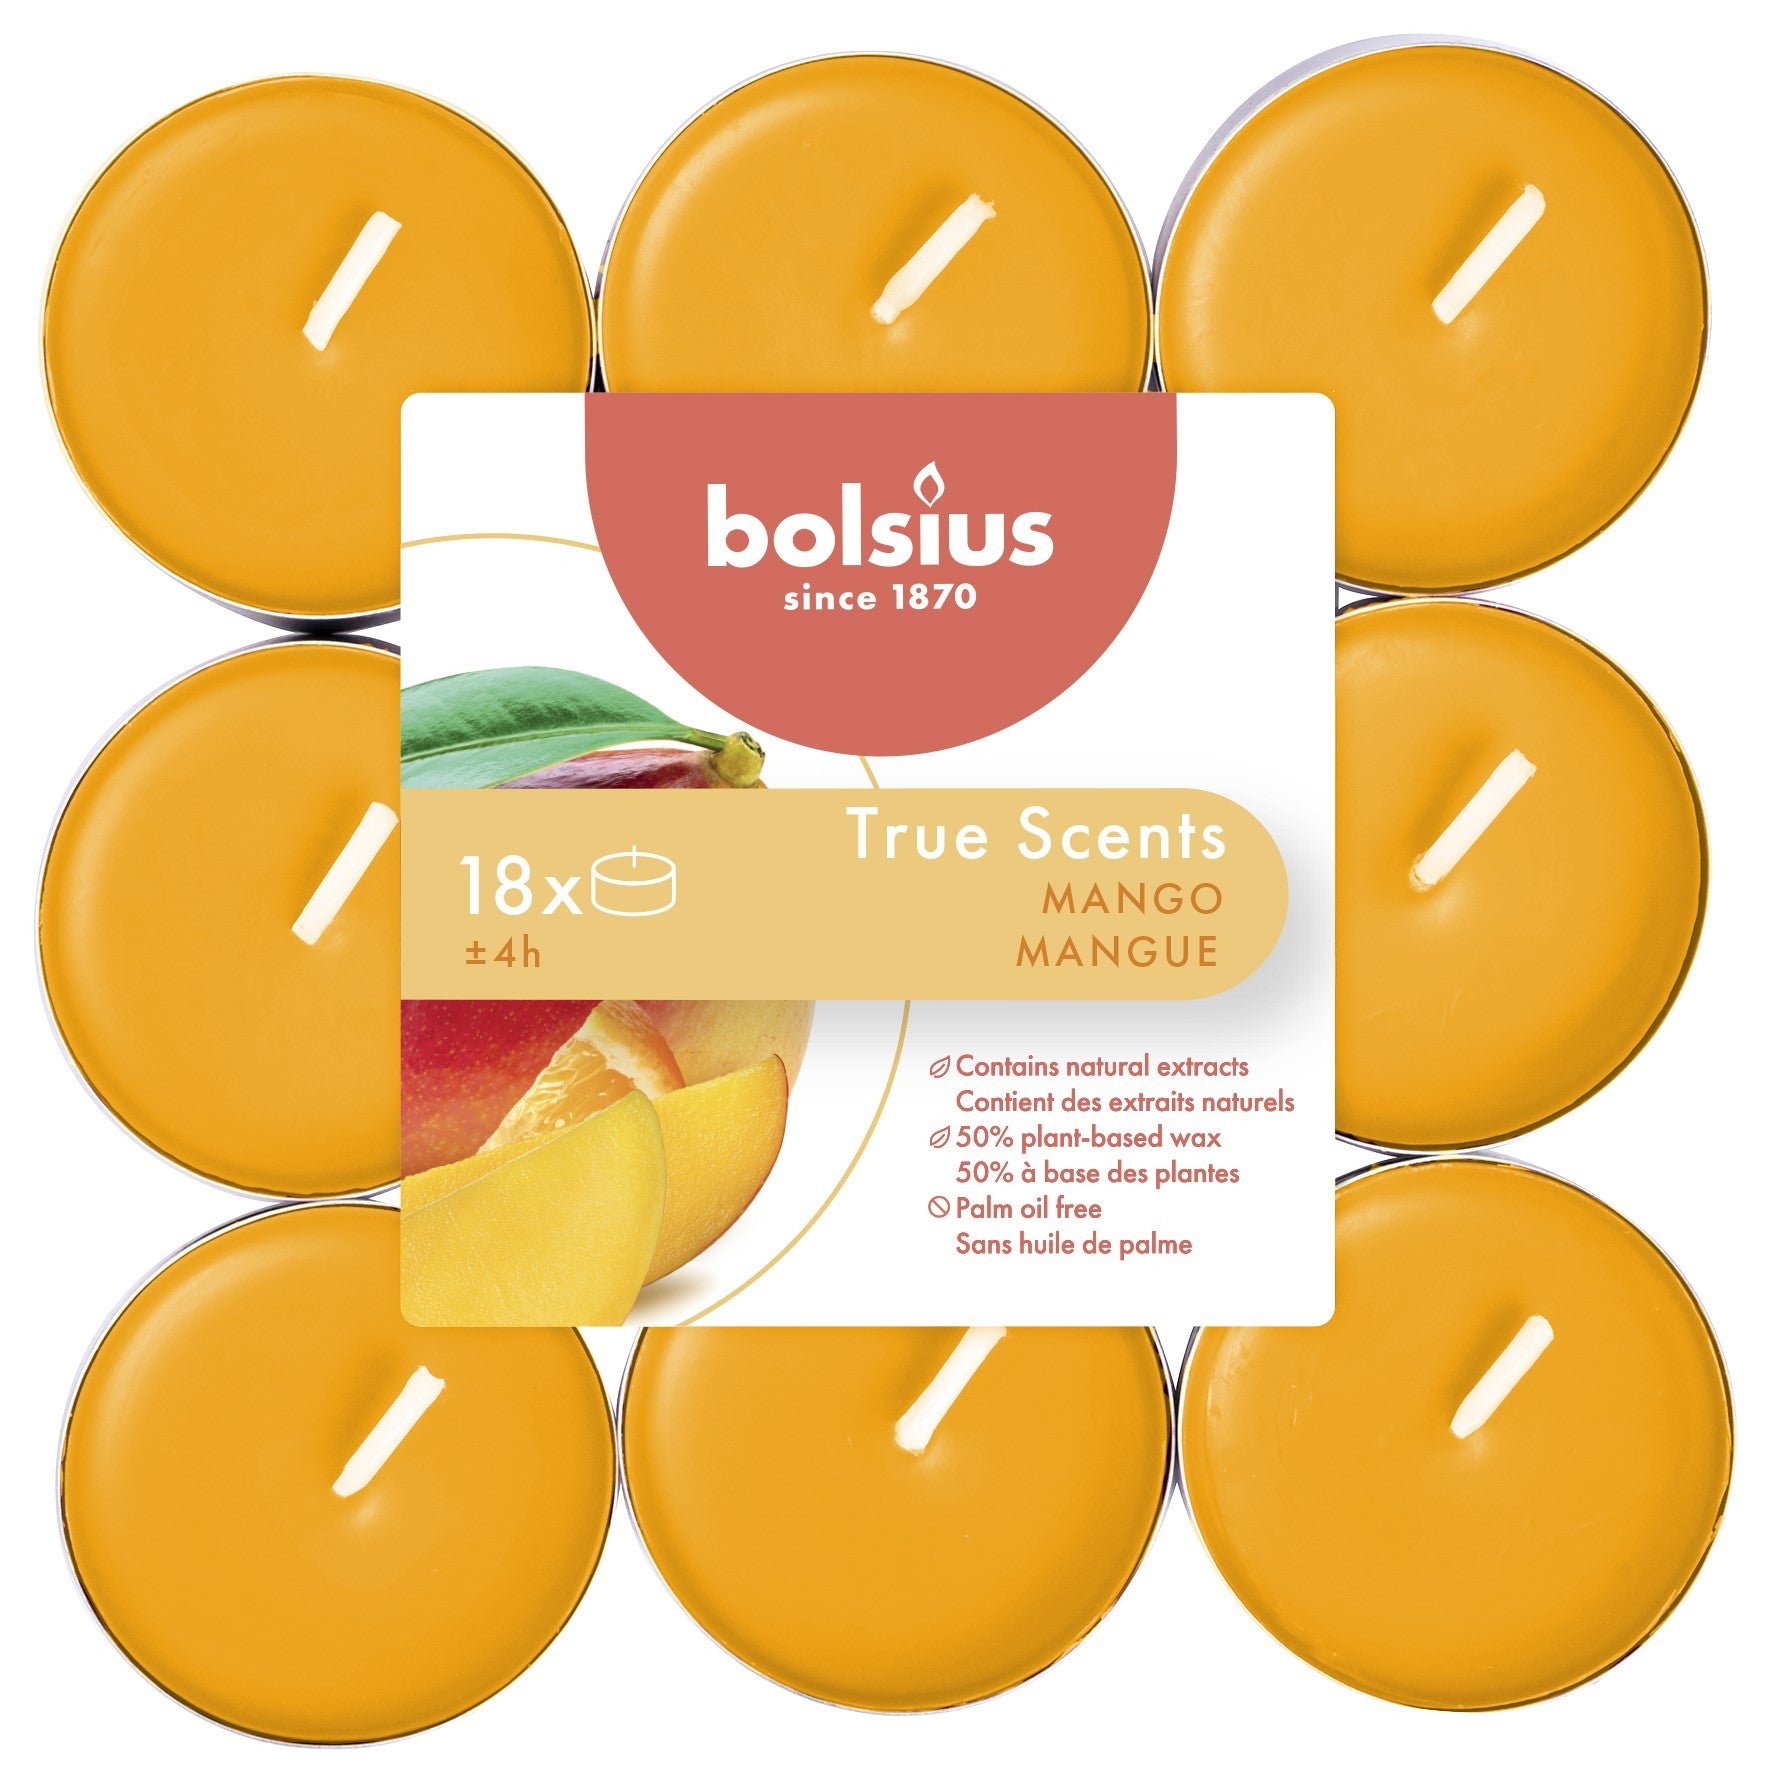 View Mango Bolsius Tealights pack of 18 information